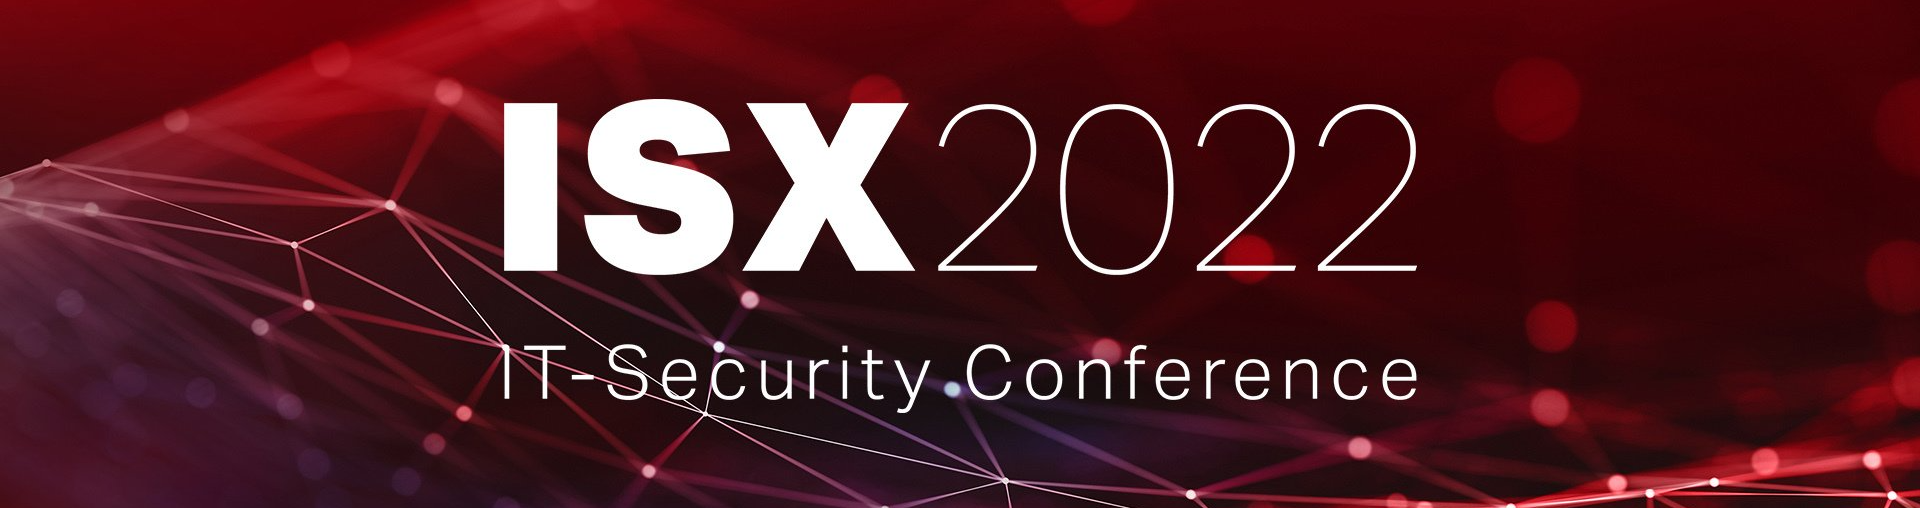 ISX 2021 IT-Security Conference